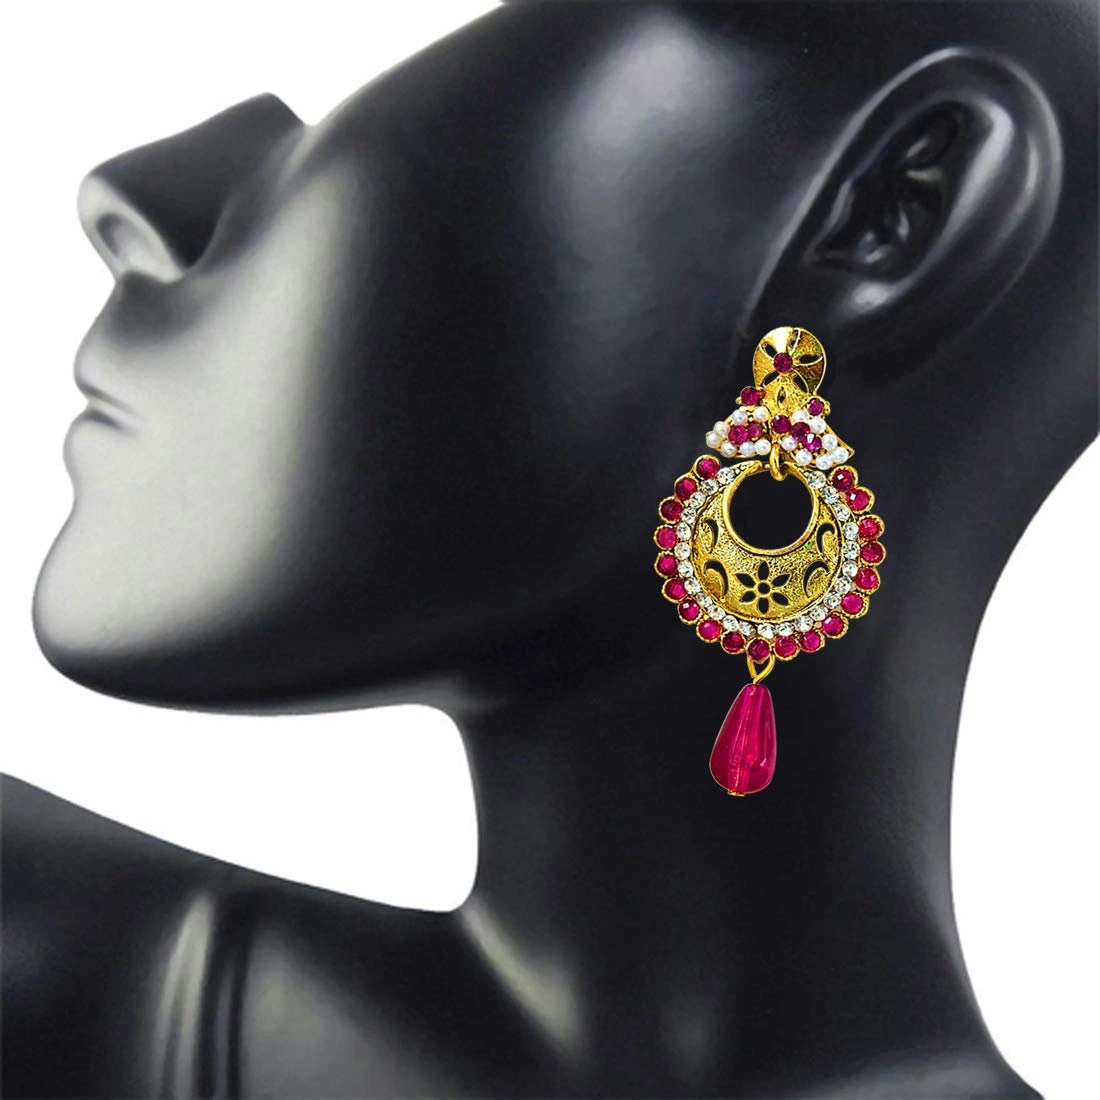 Traditional Pink & White Stones & Gold Plated Chandbali Earrings (PSE61)